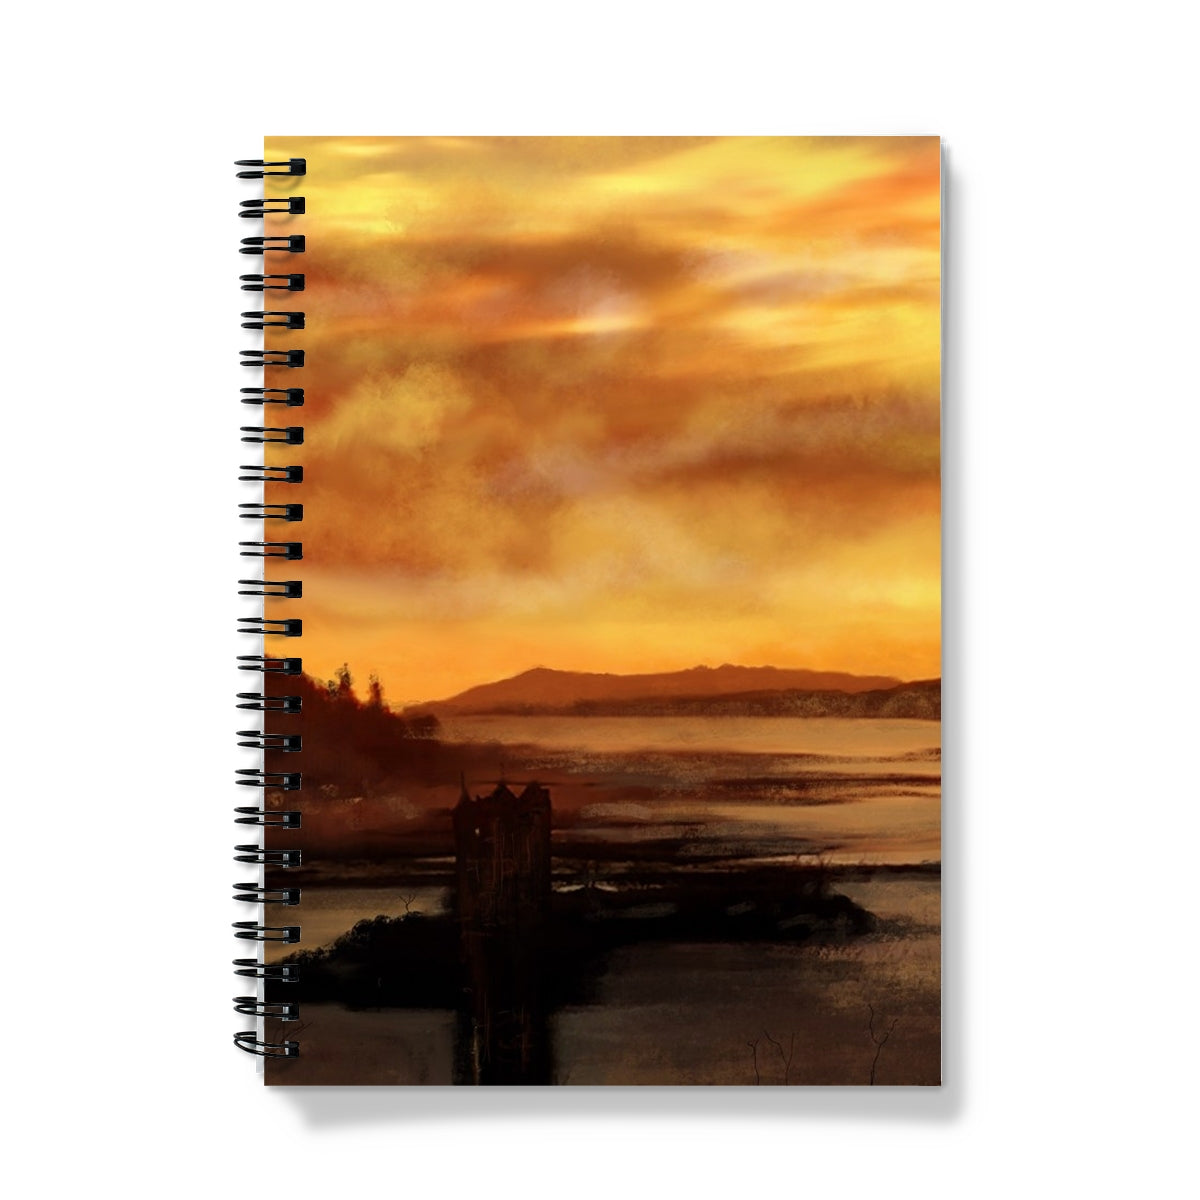 Castle Stalker Dusk Art Gifts Notebook-Journals & Notebooks-Historic & Iconic Scotland Art Gallery-A4-Lined-Paintings, Prints, Homeware, Art Gifts From Scotland By Scottish Artist Kevin Hunter